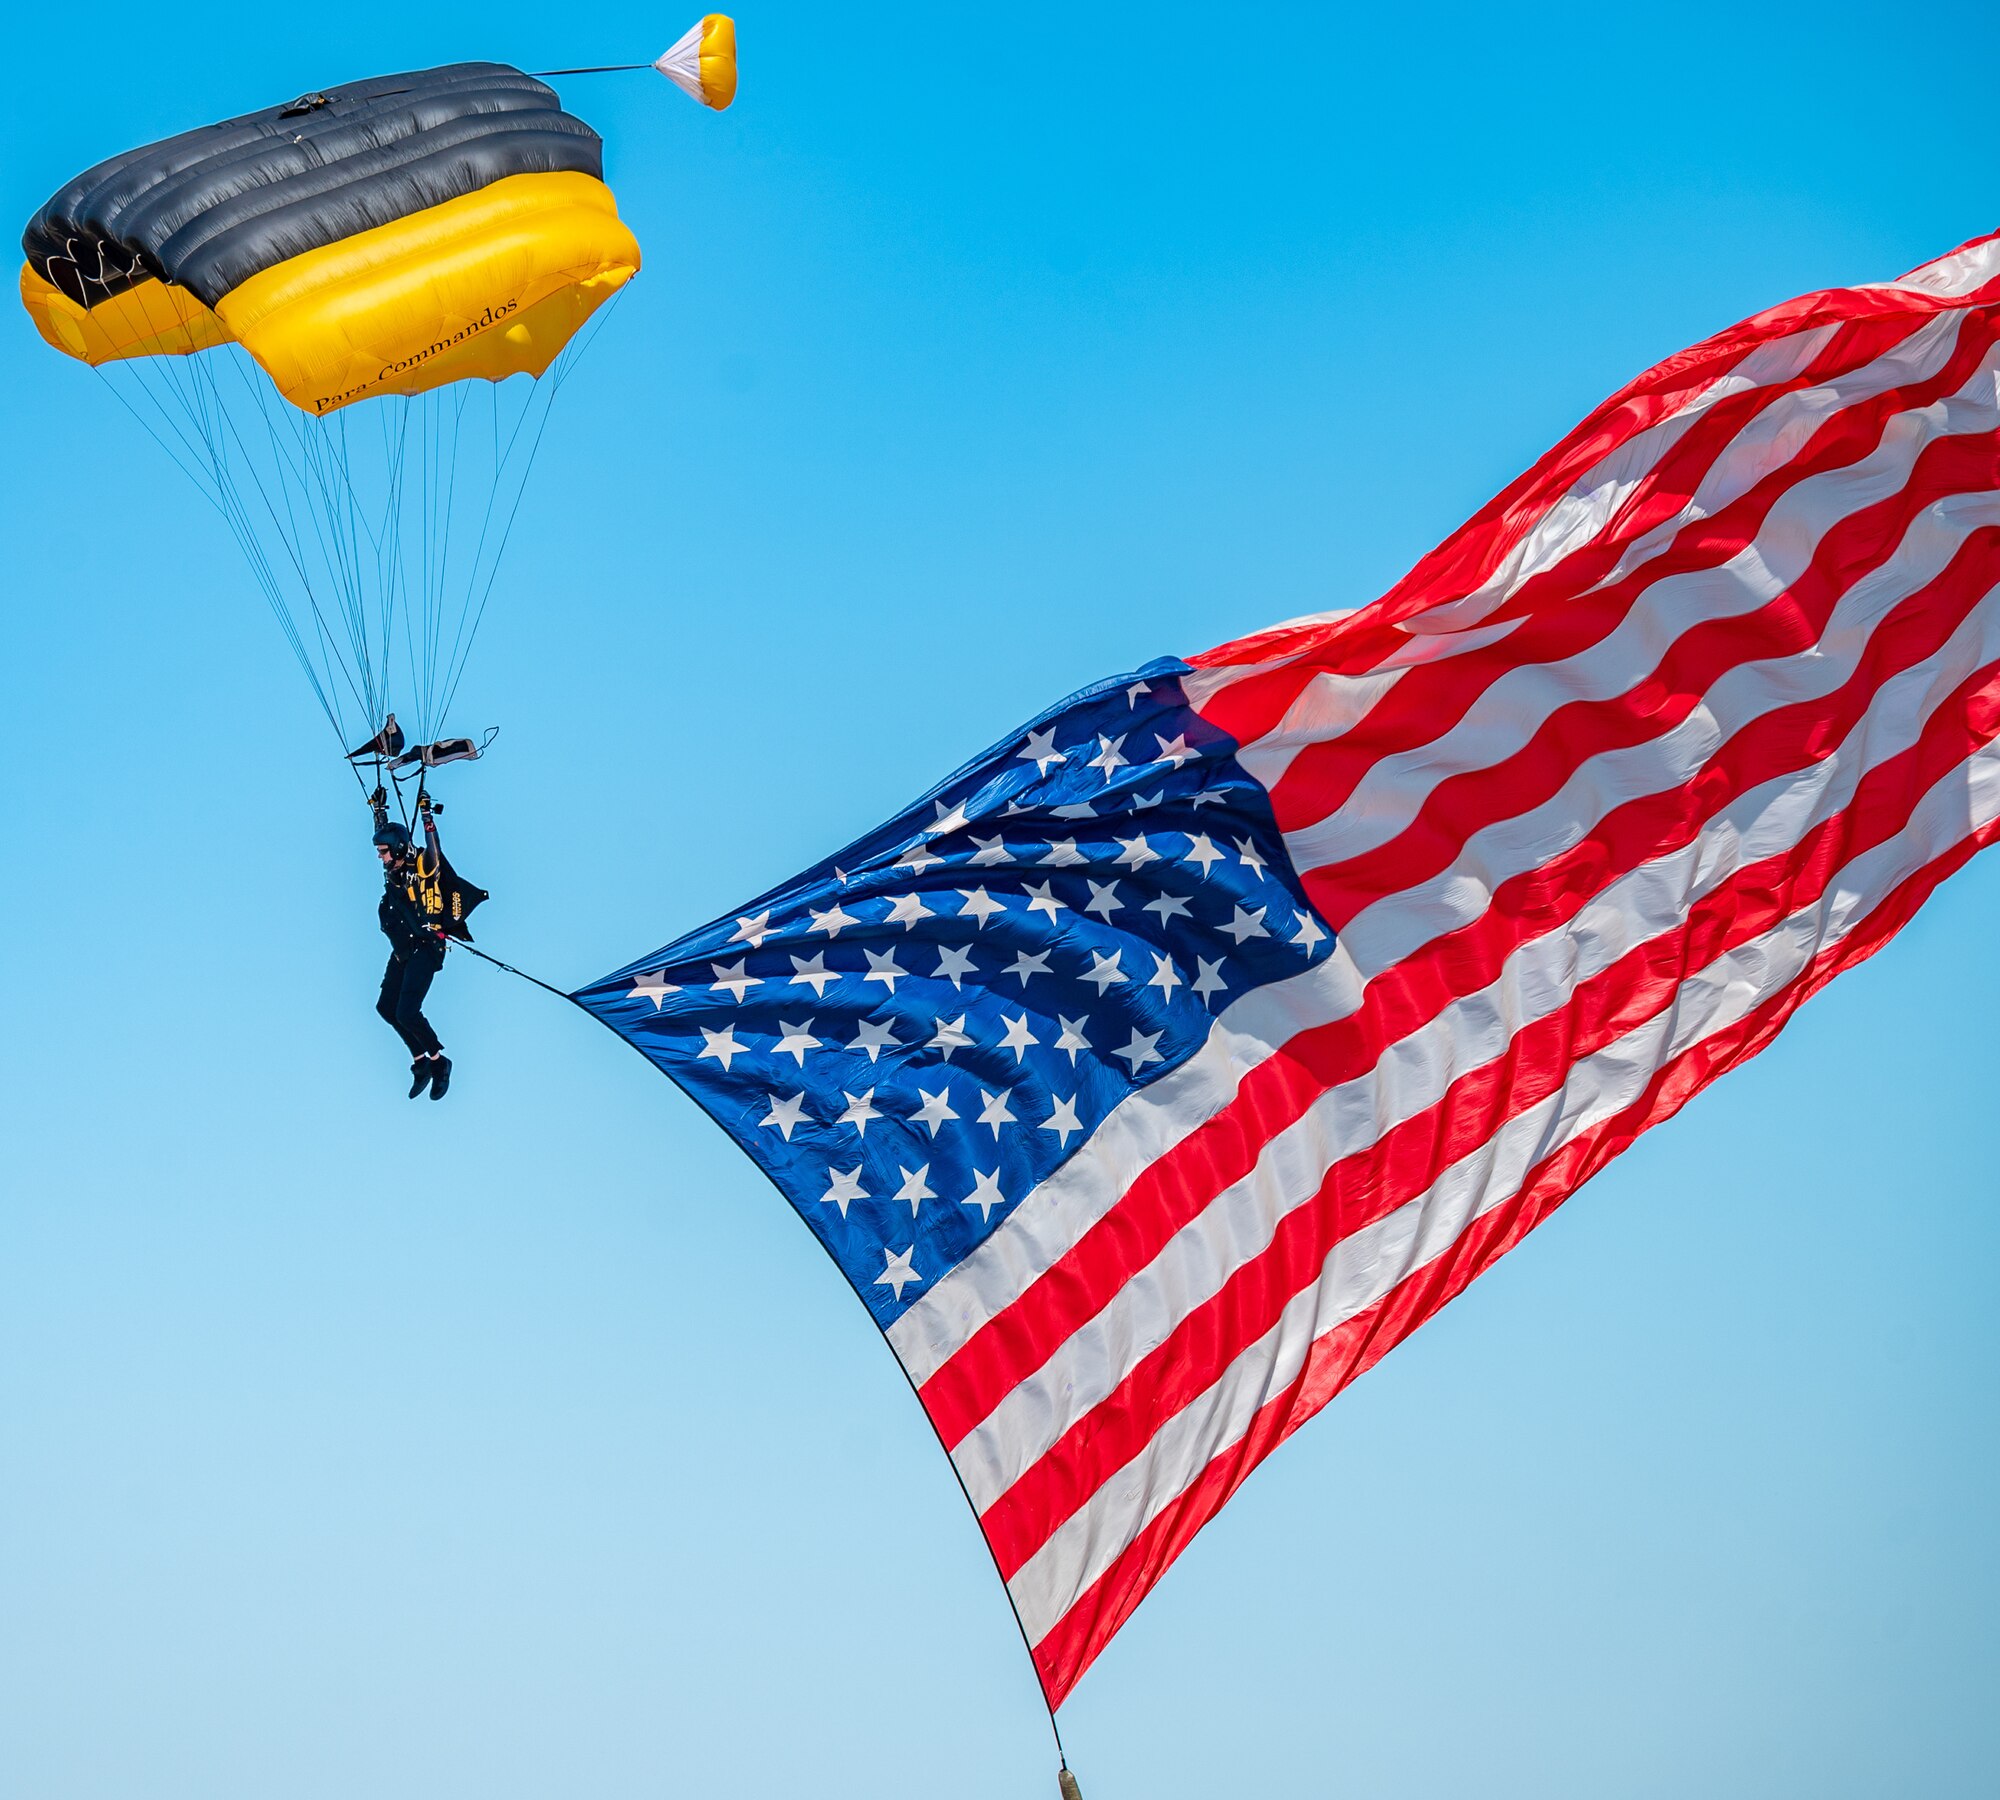 The U. S. Special Operations Command Parachute Team (Para-Commandos) parachute over the flightline during Montana's Military Open House "Flight Over the Falls" at Montana Air National Guard Base, Great Falls, Montana, July 23, 2022